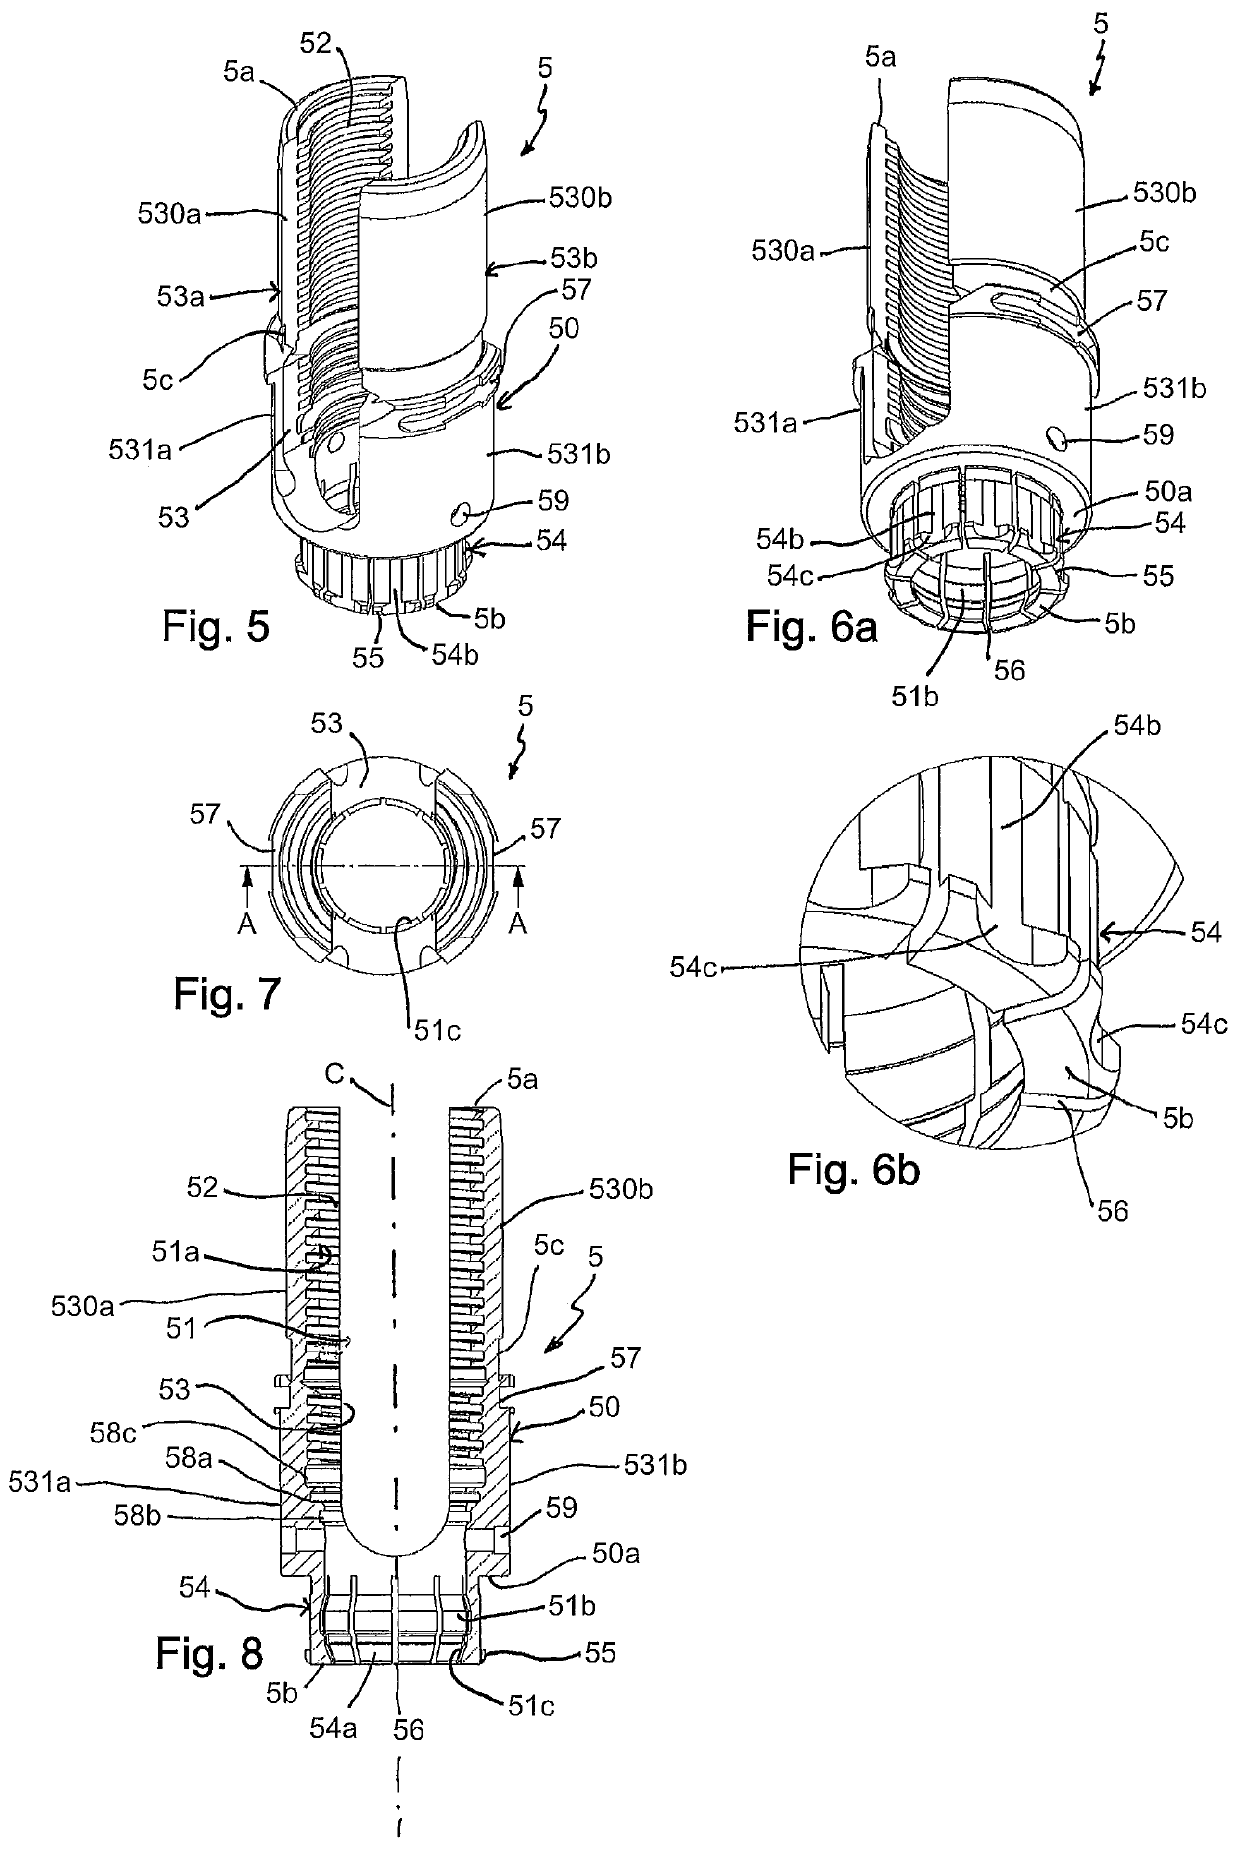 Polyaxial bone anchoring device and system including an instrument and a polyaxial bone anchoring device